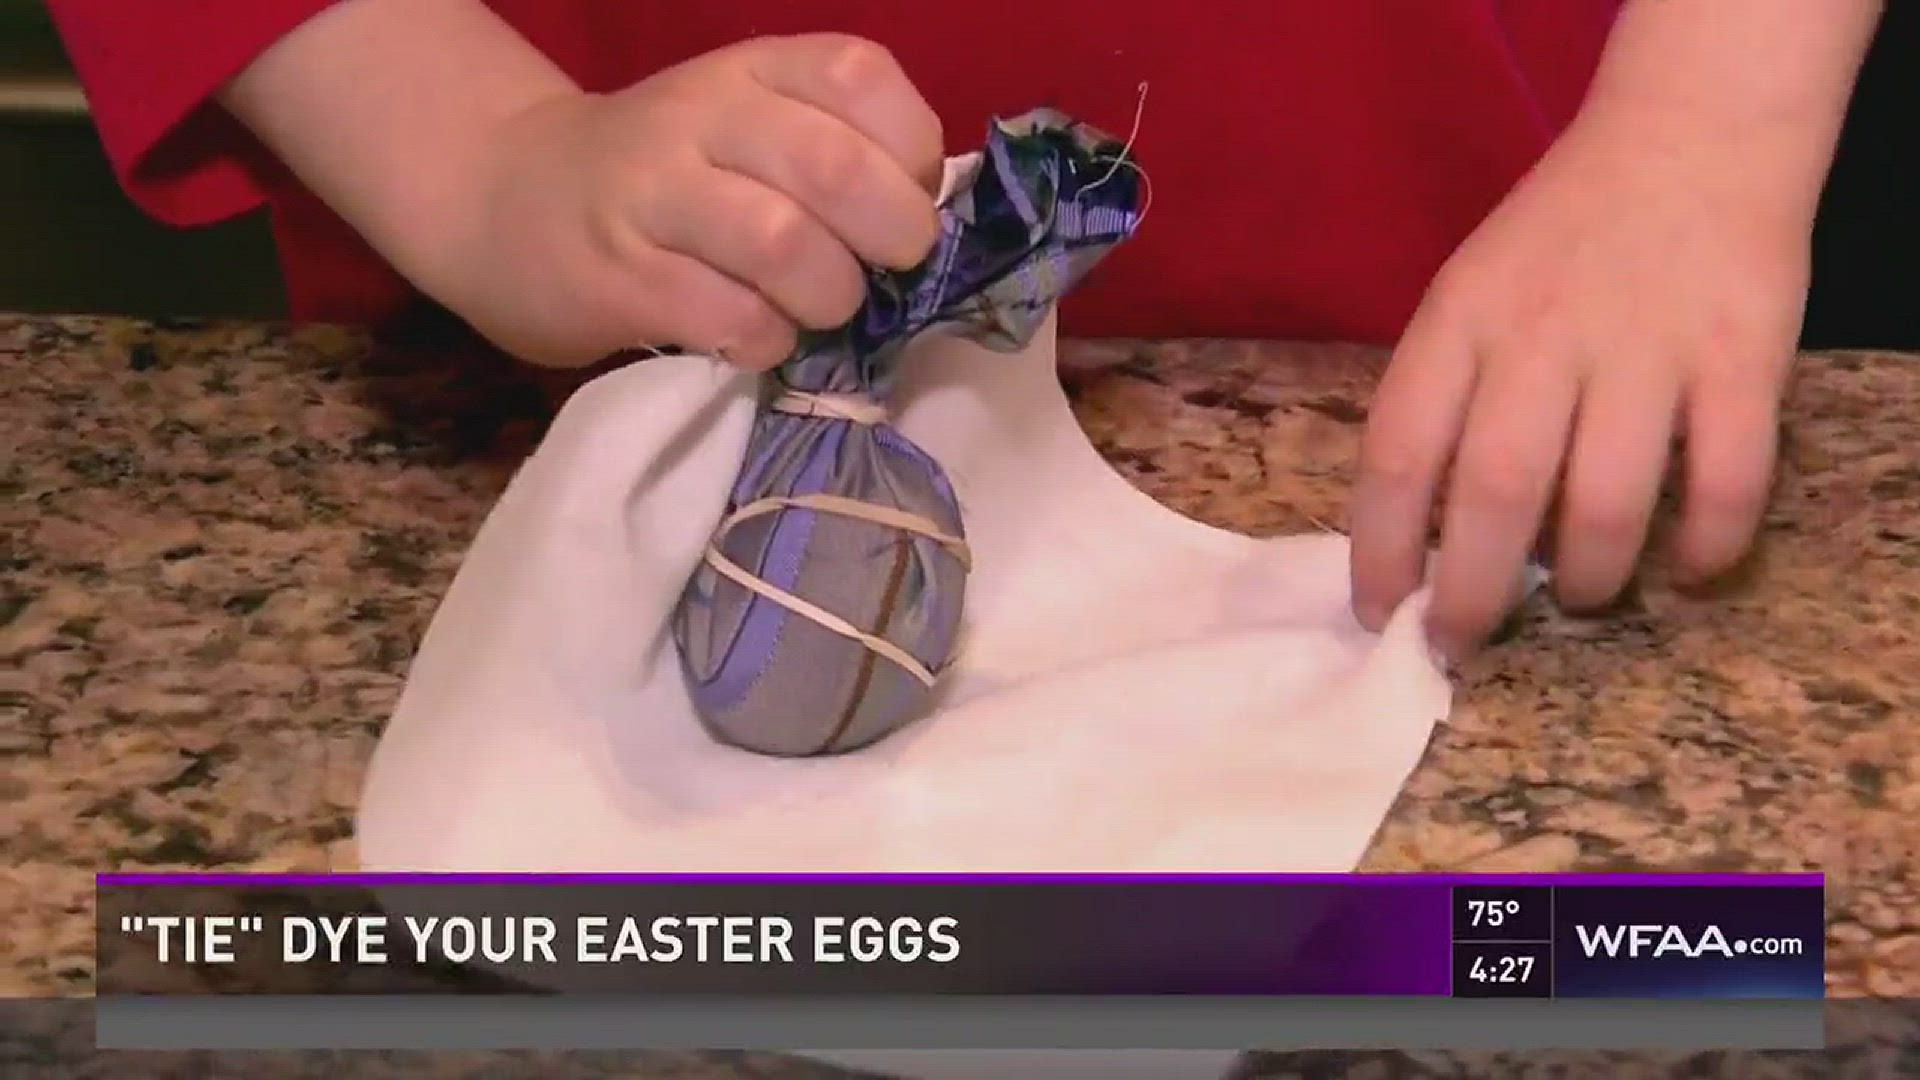 Here's how to use discarded neckties to create unusual Easter eggs.